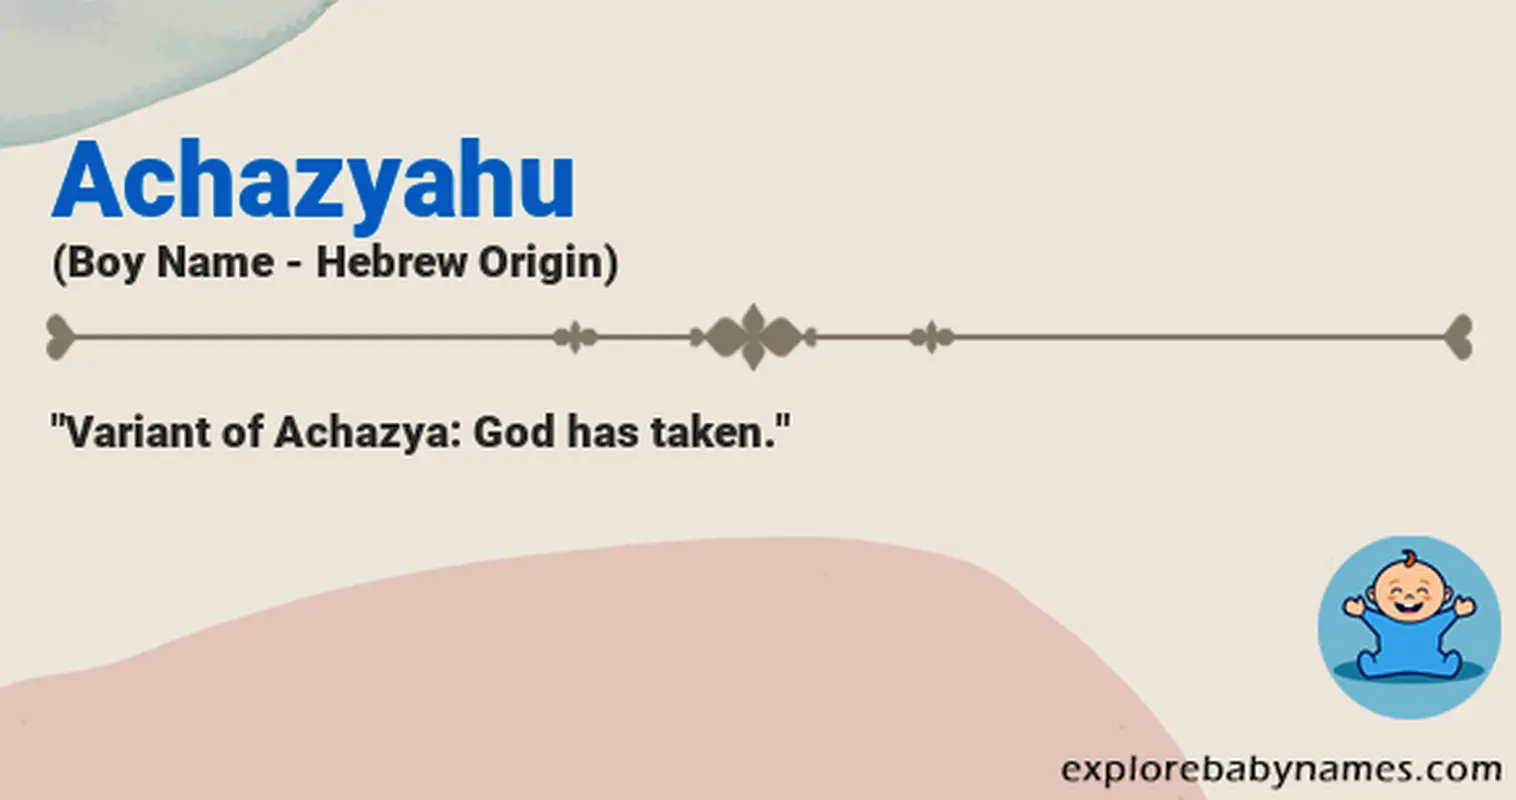 Meaning of Achazyahu